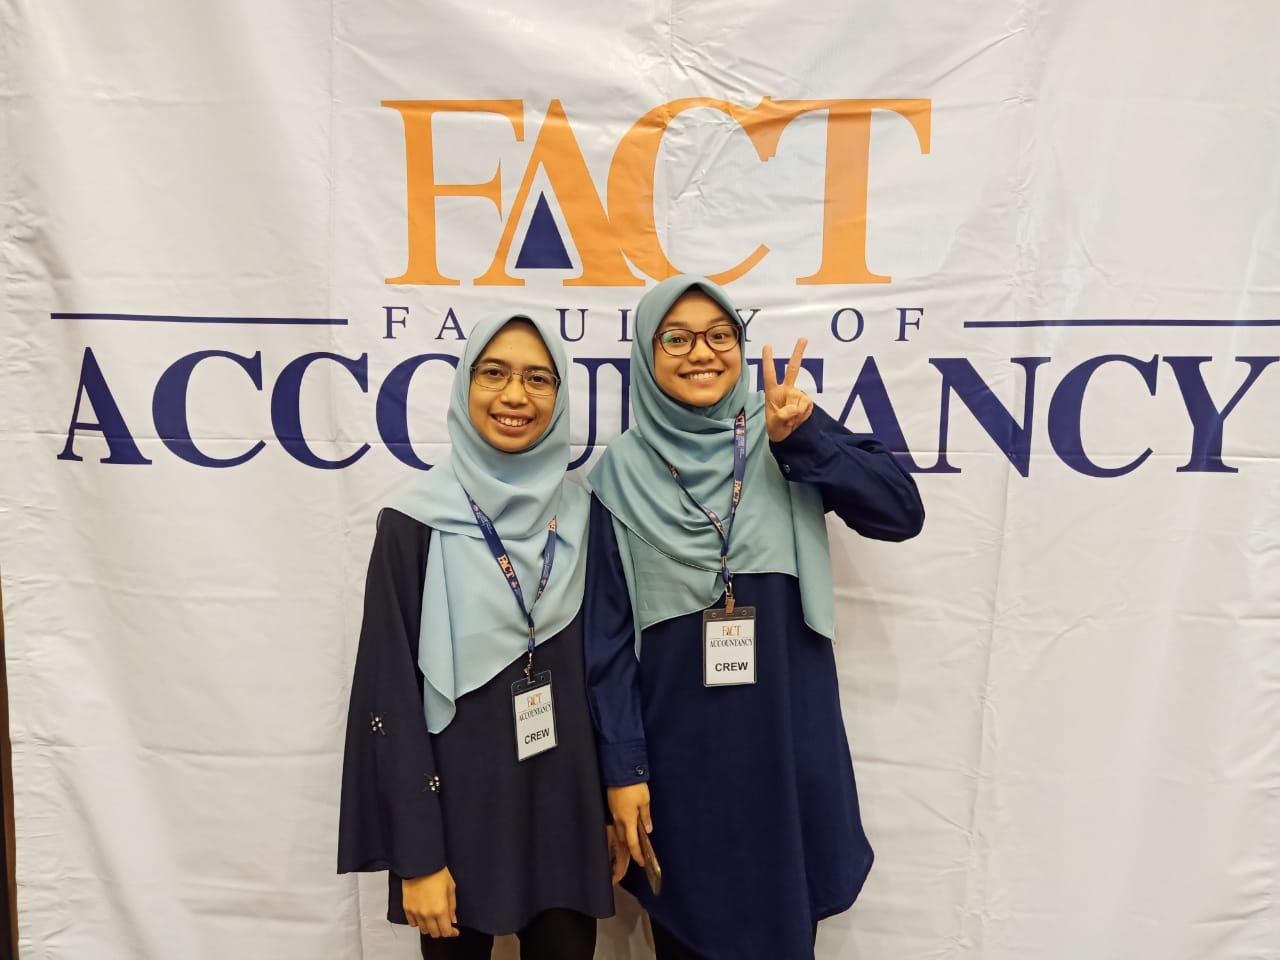 22yo uitm student is now the world 'top affiliate' for her acca success